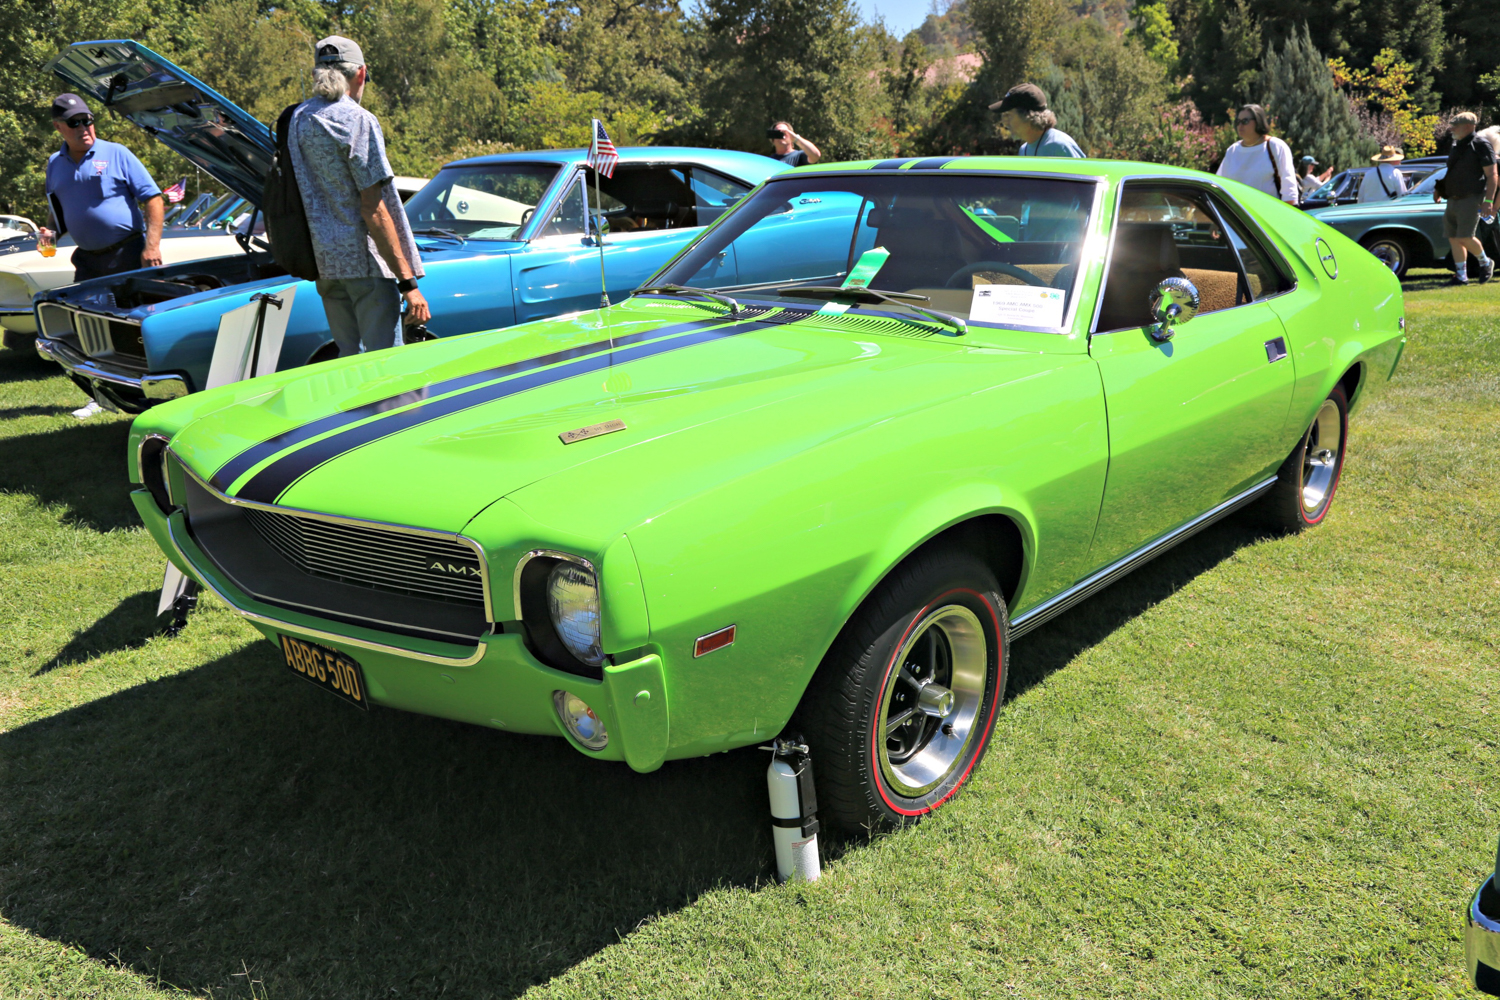 1969 AMC AMX 500 Speical. Kevin N. Shannon. Ironstone Concours 2018 